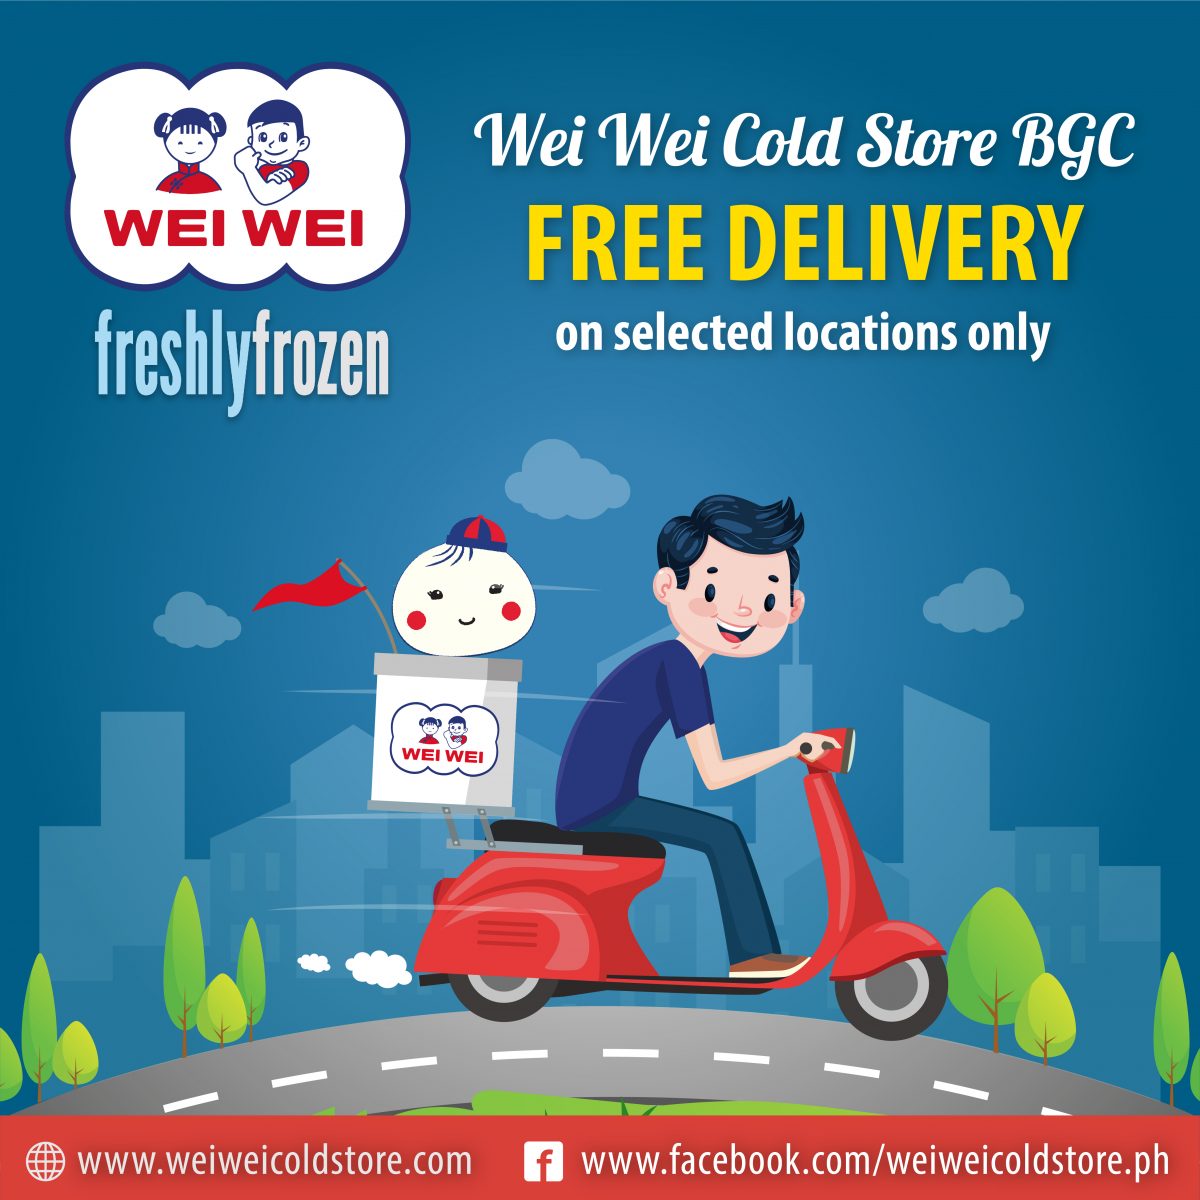 Wei Wei Cold Store BGC Now Offers FREE DELIVERY